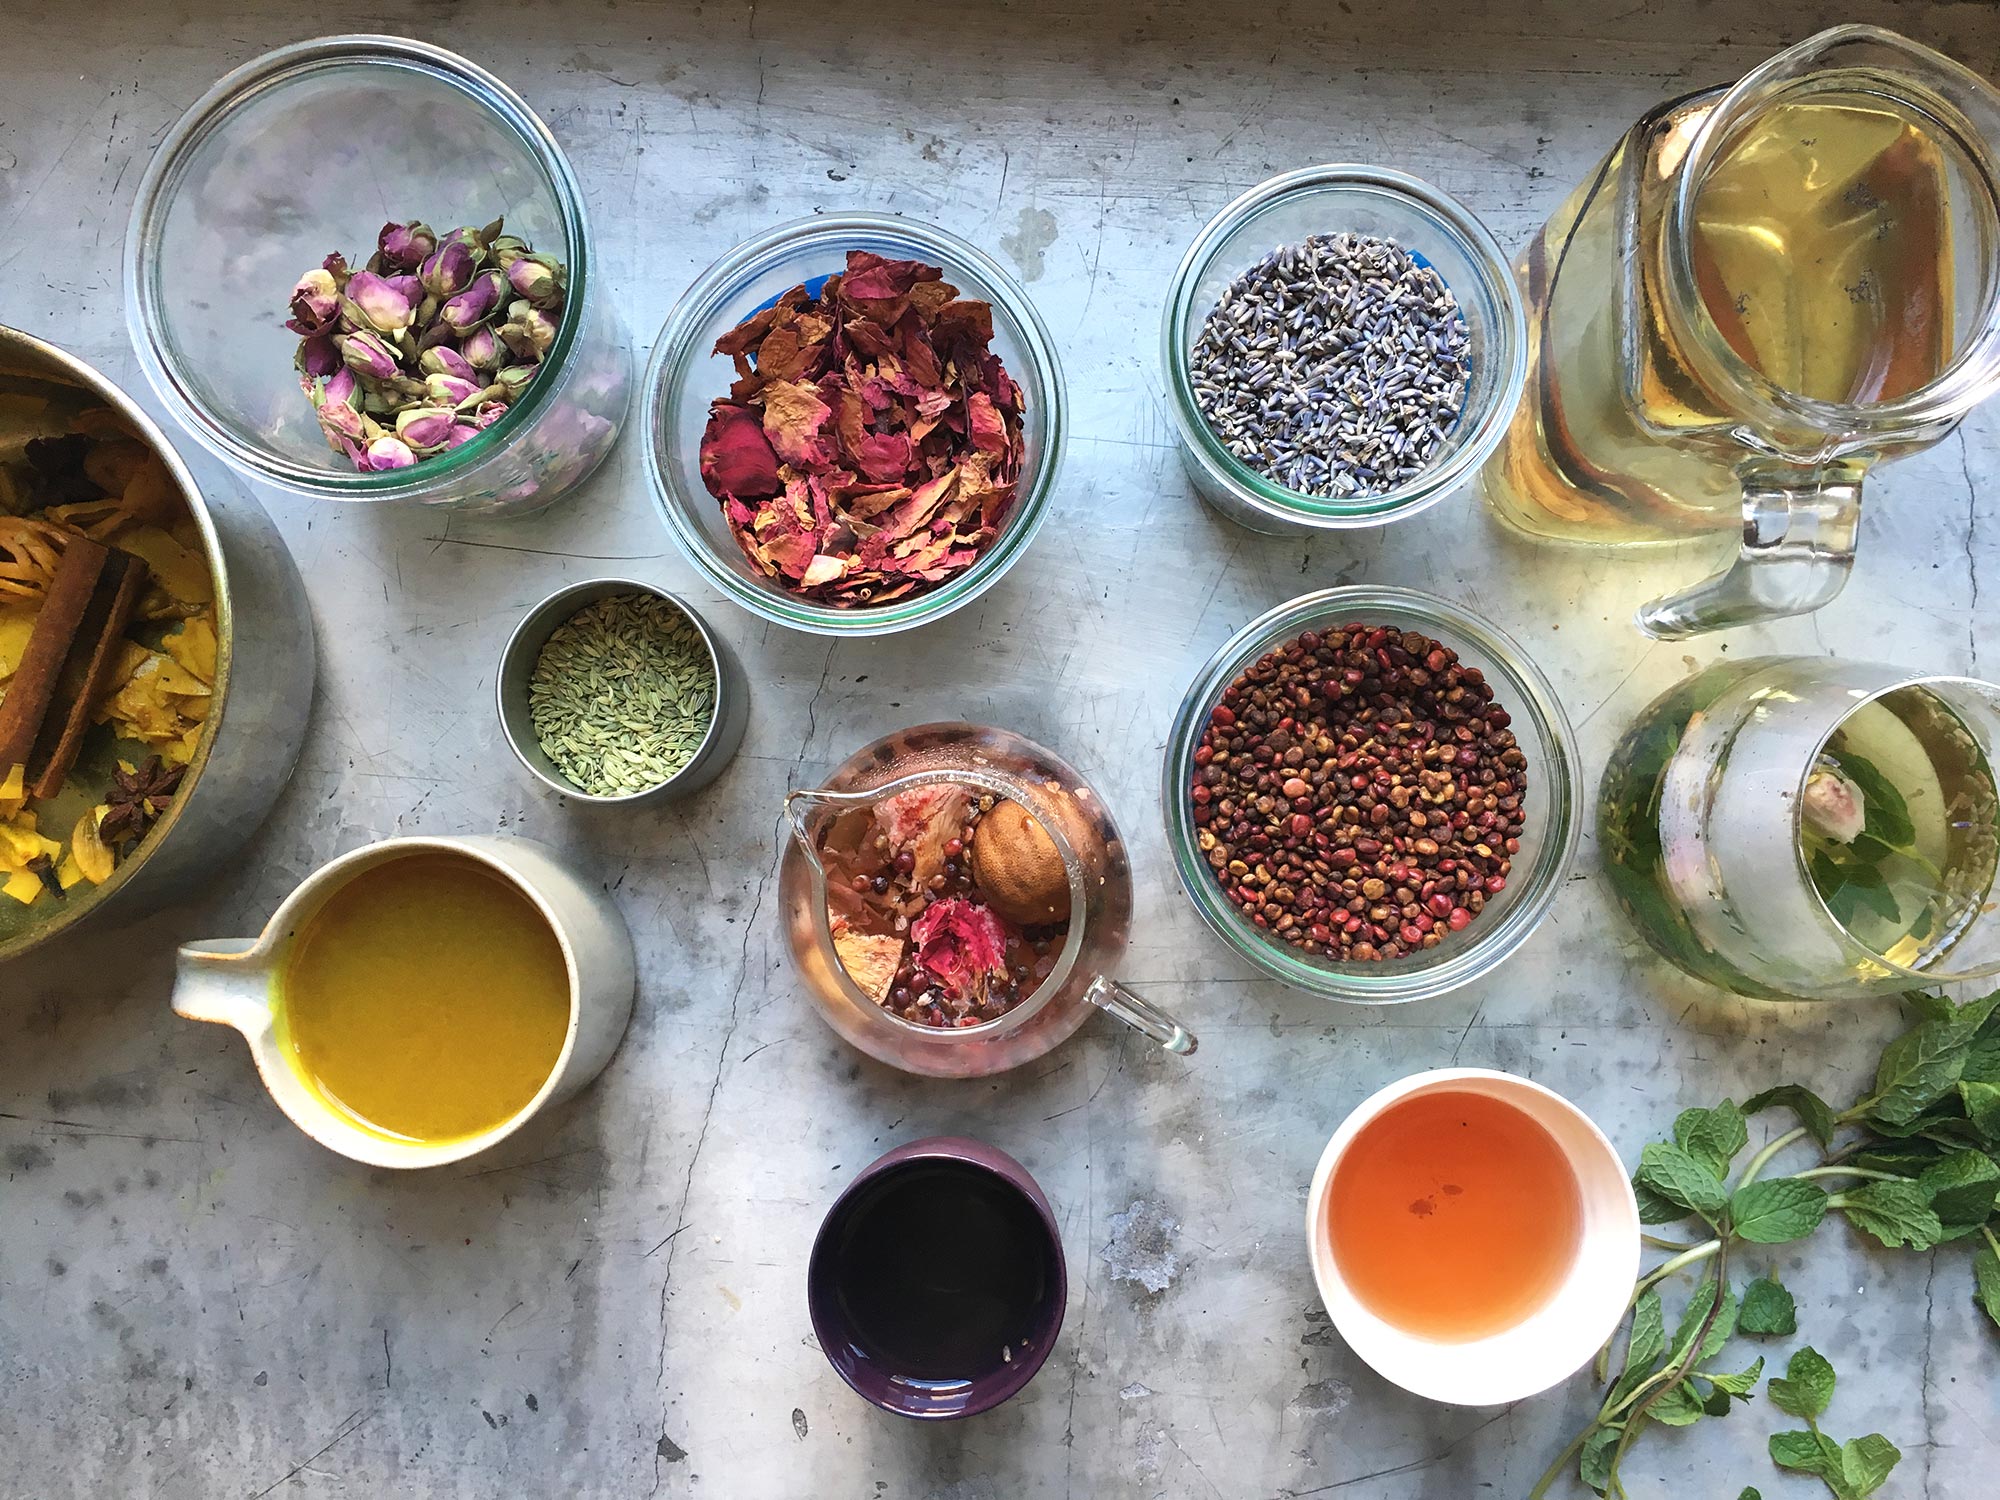 Mix your own delicious herbal tea using leftover spices